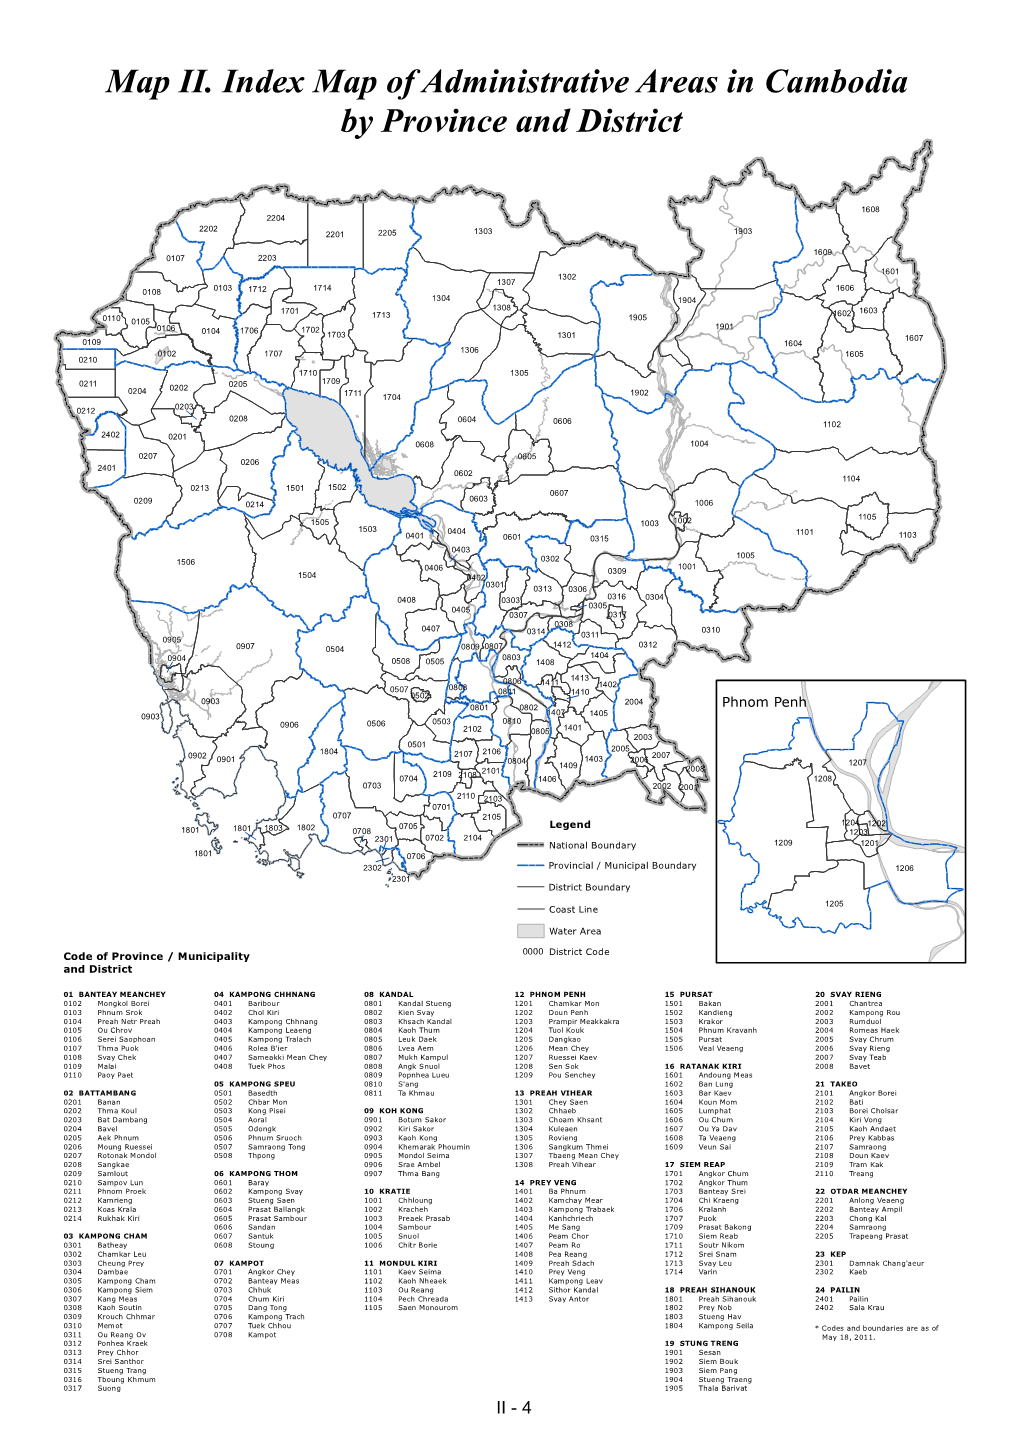 Map Ii Index Map Of Administrative Areas In Cambodia By Province And District 